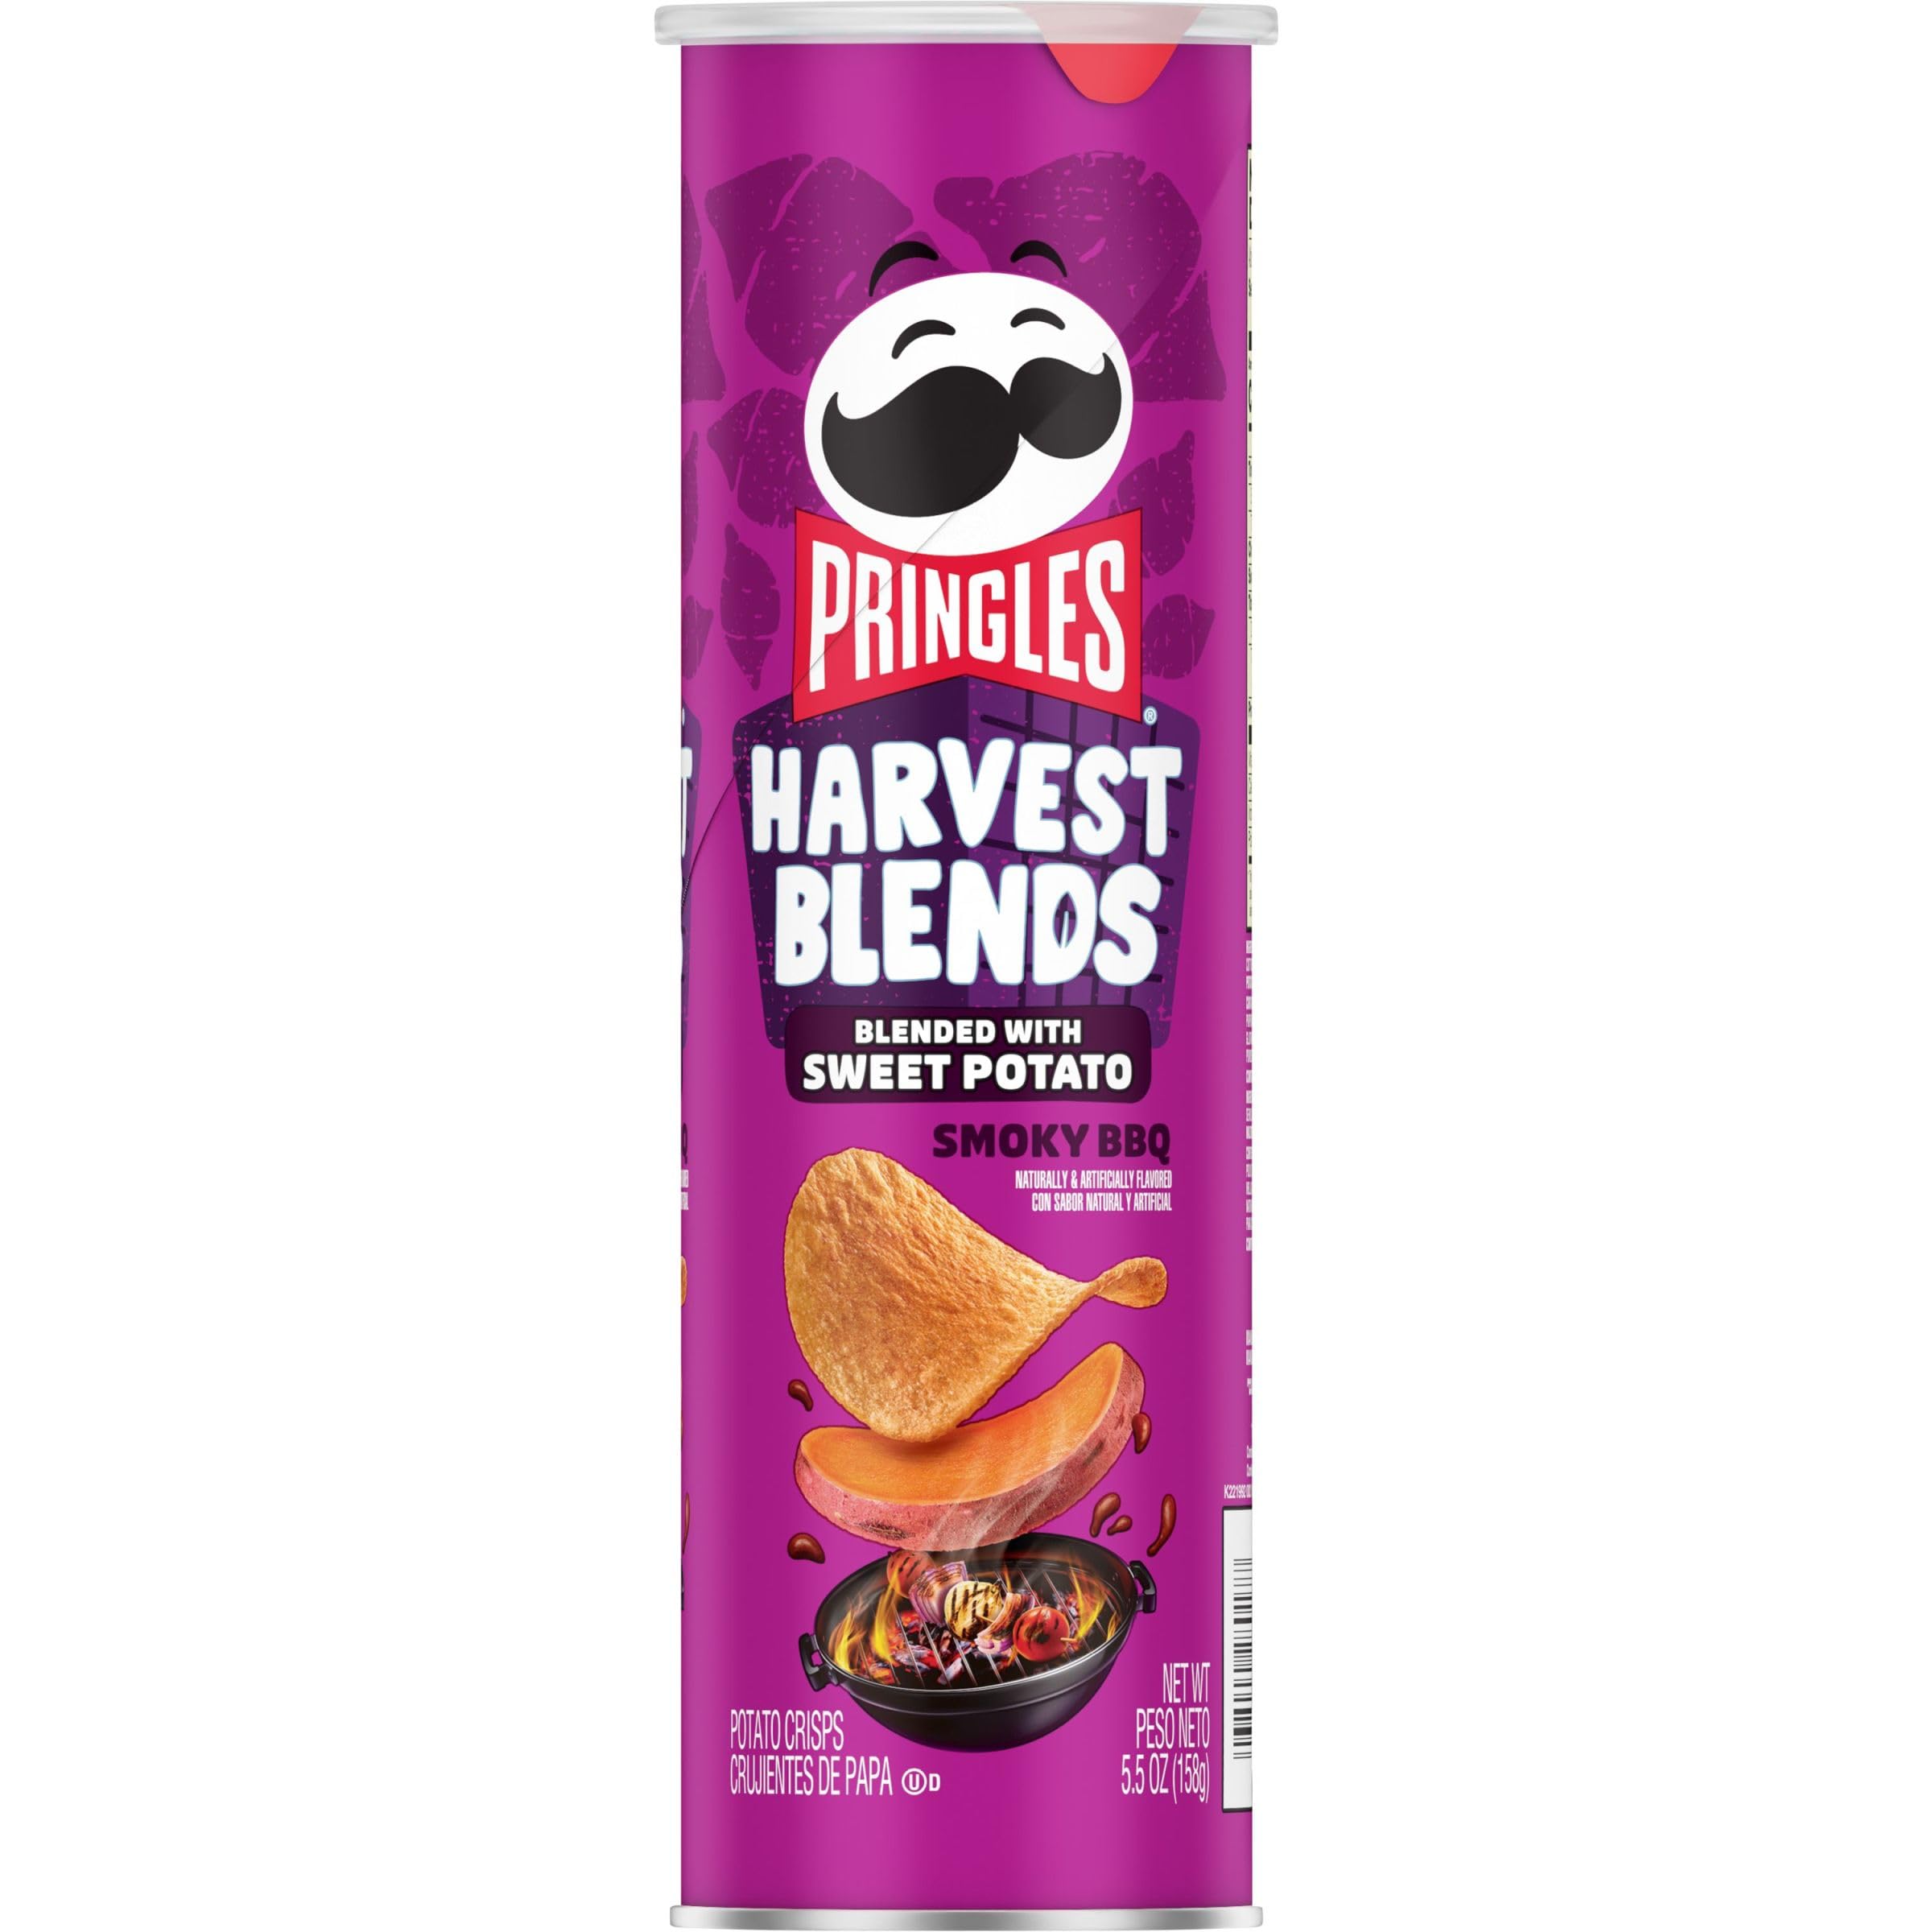 2-Count 5.5-Oz Pringles Harvest Blends Smoky BBQ Potato Chips $3.49 + Free Shipping w/ Prime or on $35+